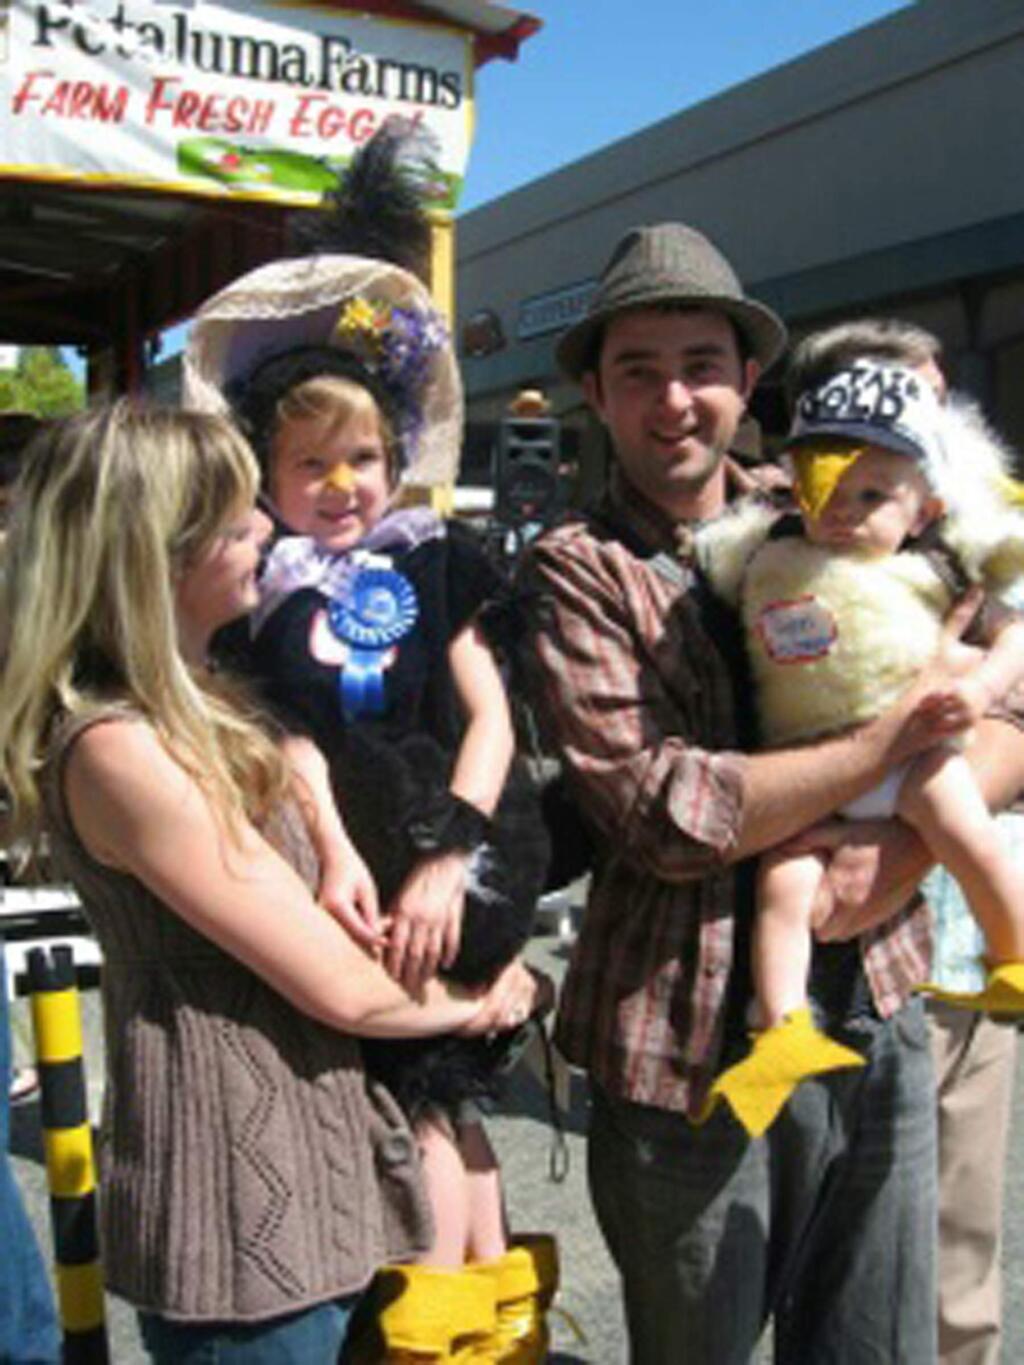 The Hirschmugl family, Jenny and Jon with daughter Hazel and son Henri dressed for the Butter and Egg Days festival in Petaluma. Hazel won 'Cutist Little Chick in Town' contest in 2006 and four years later Henri won.